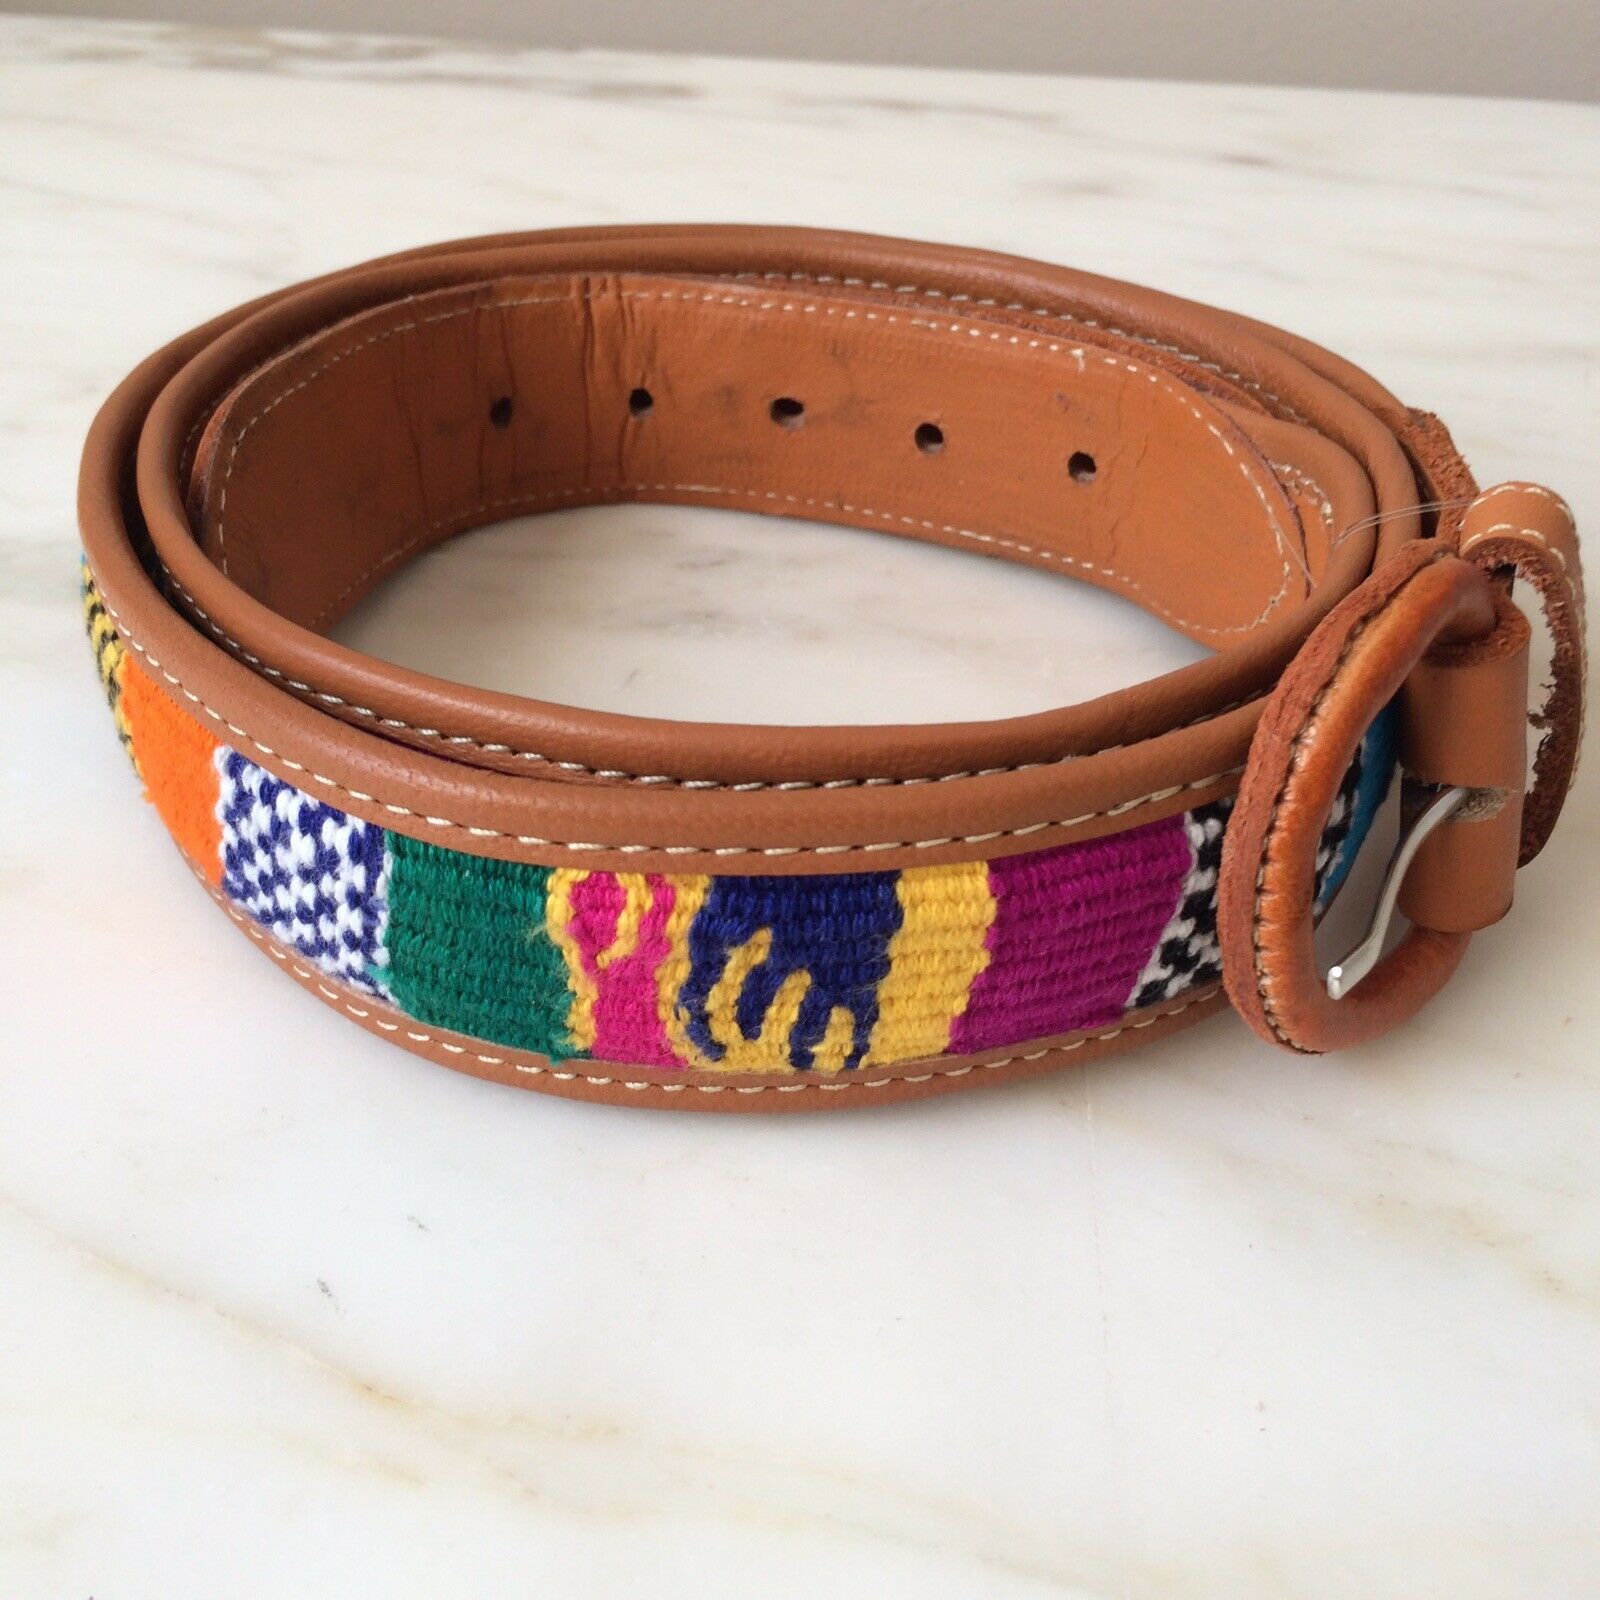 NEW Woven Leather Belt Handcrafted Mexican Cute Gift Handmade Women